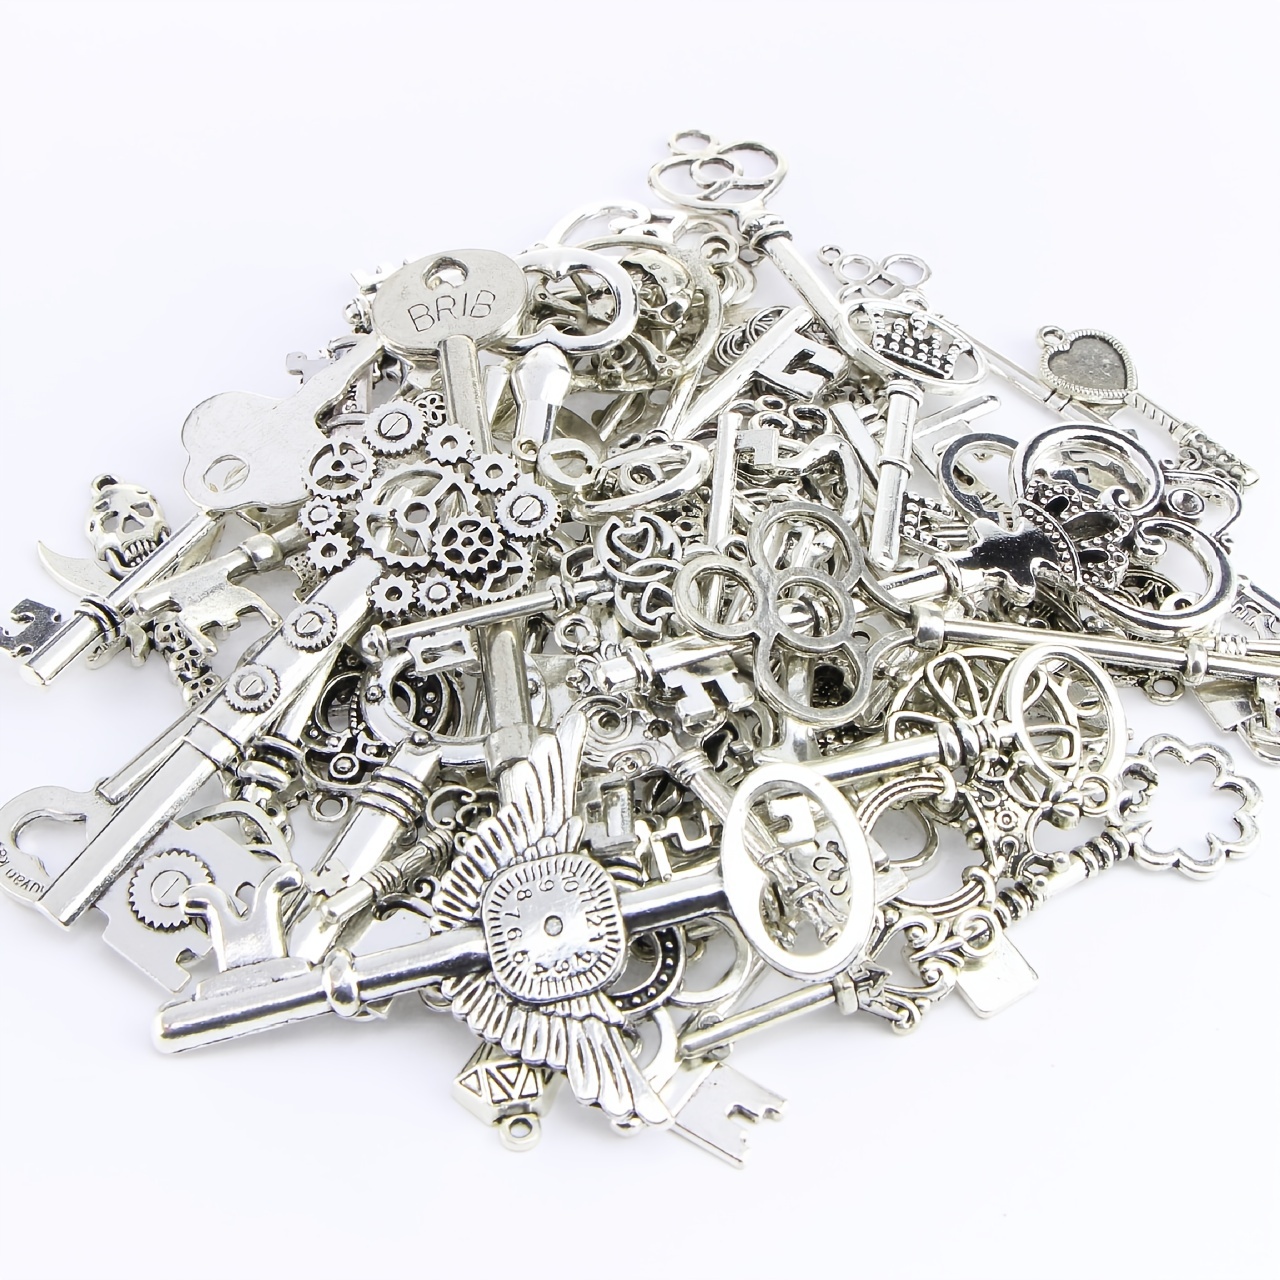 Wholesale Charms for Bracelets - Charms in Bulk - Silver Palace Inc.